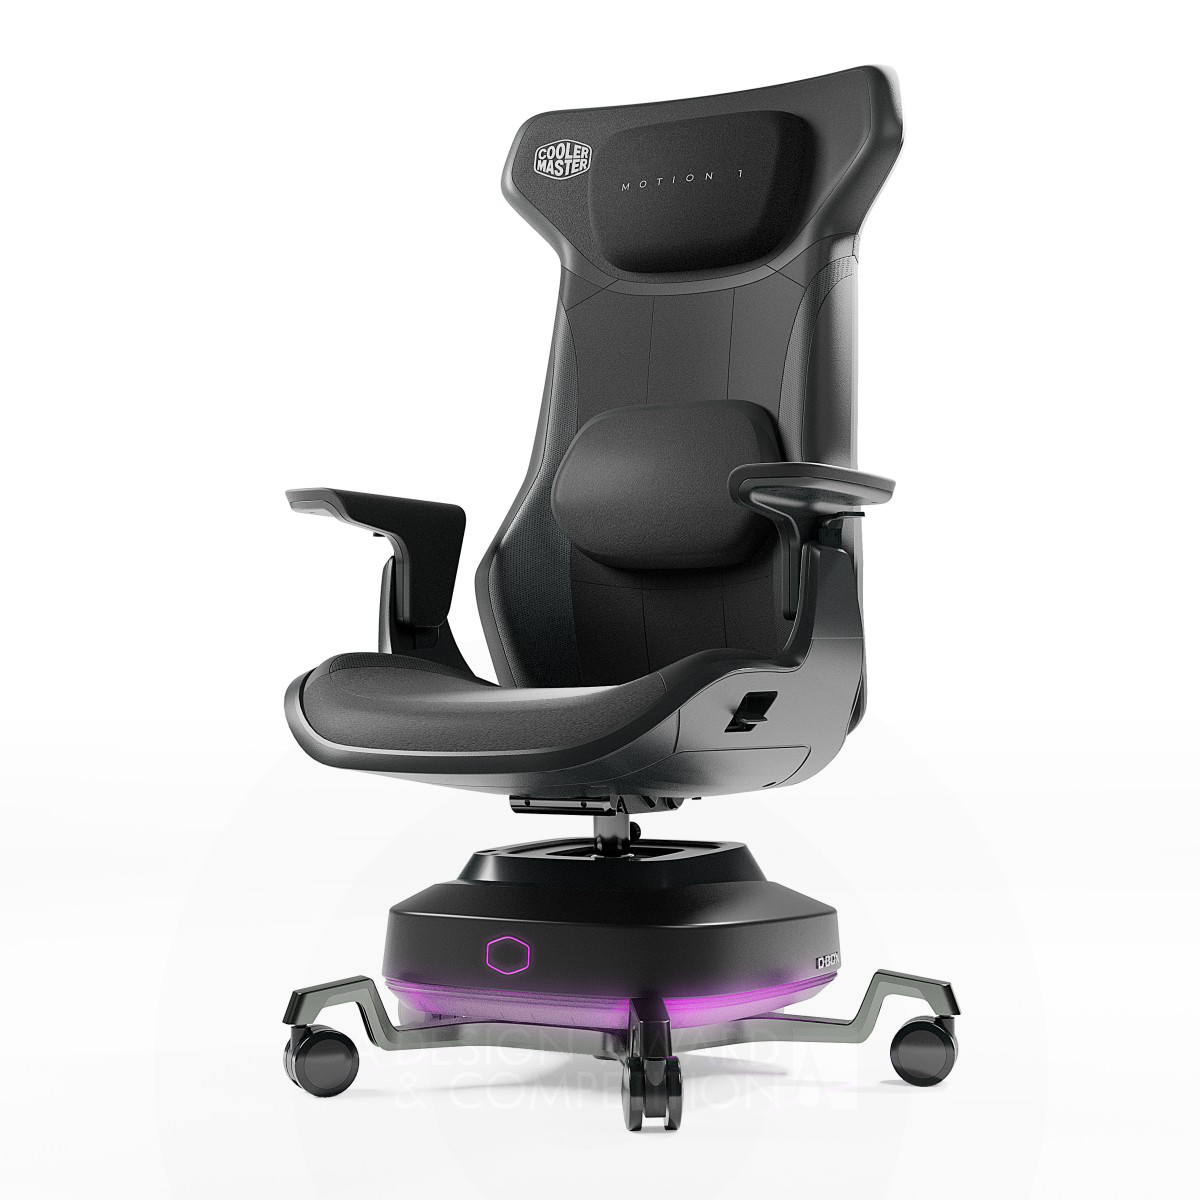 Motion 1 Haptic Gaming Chair